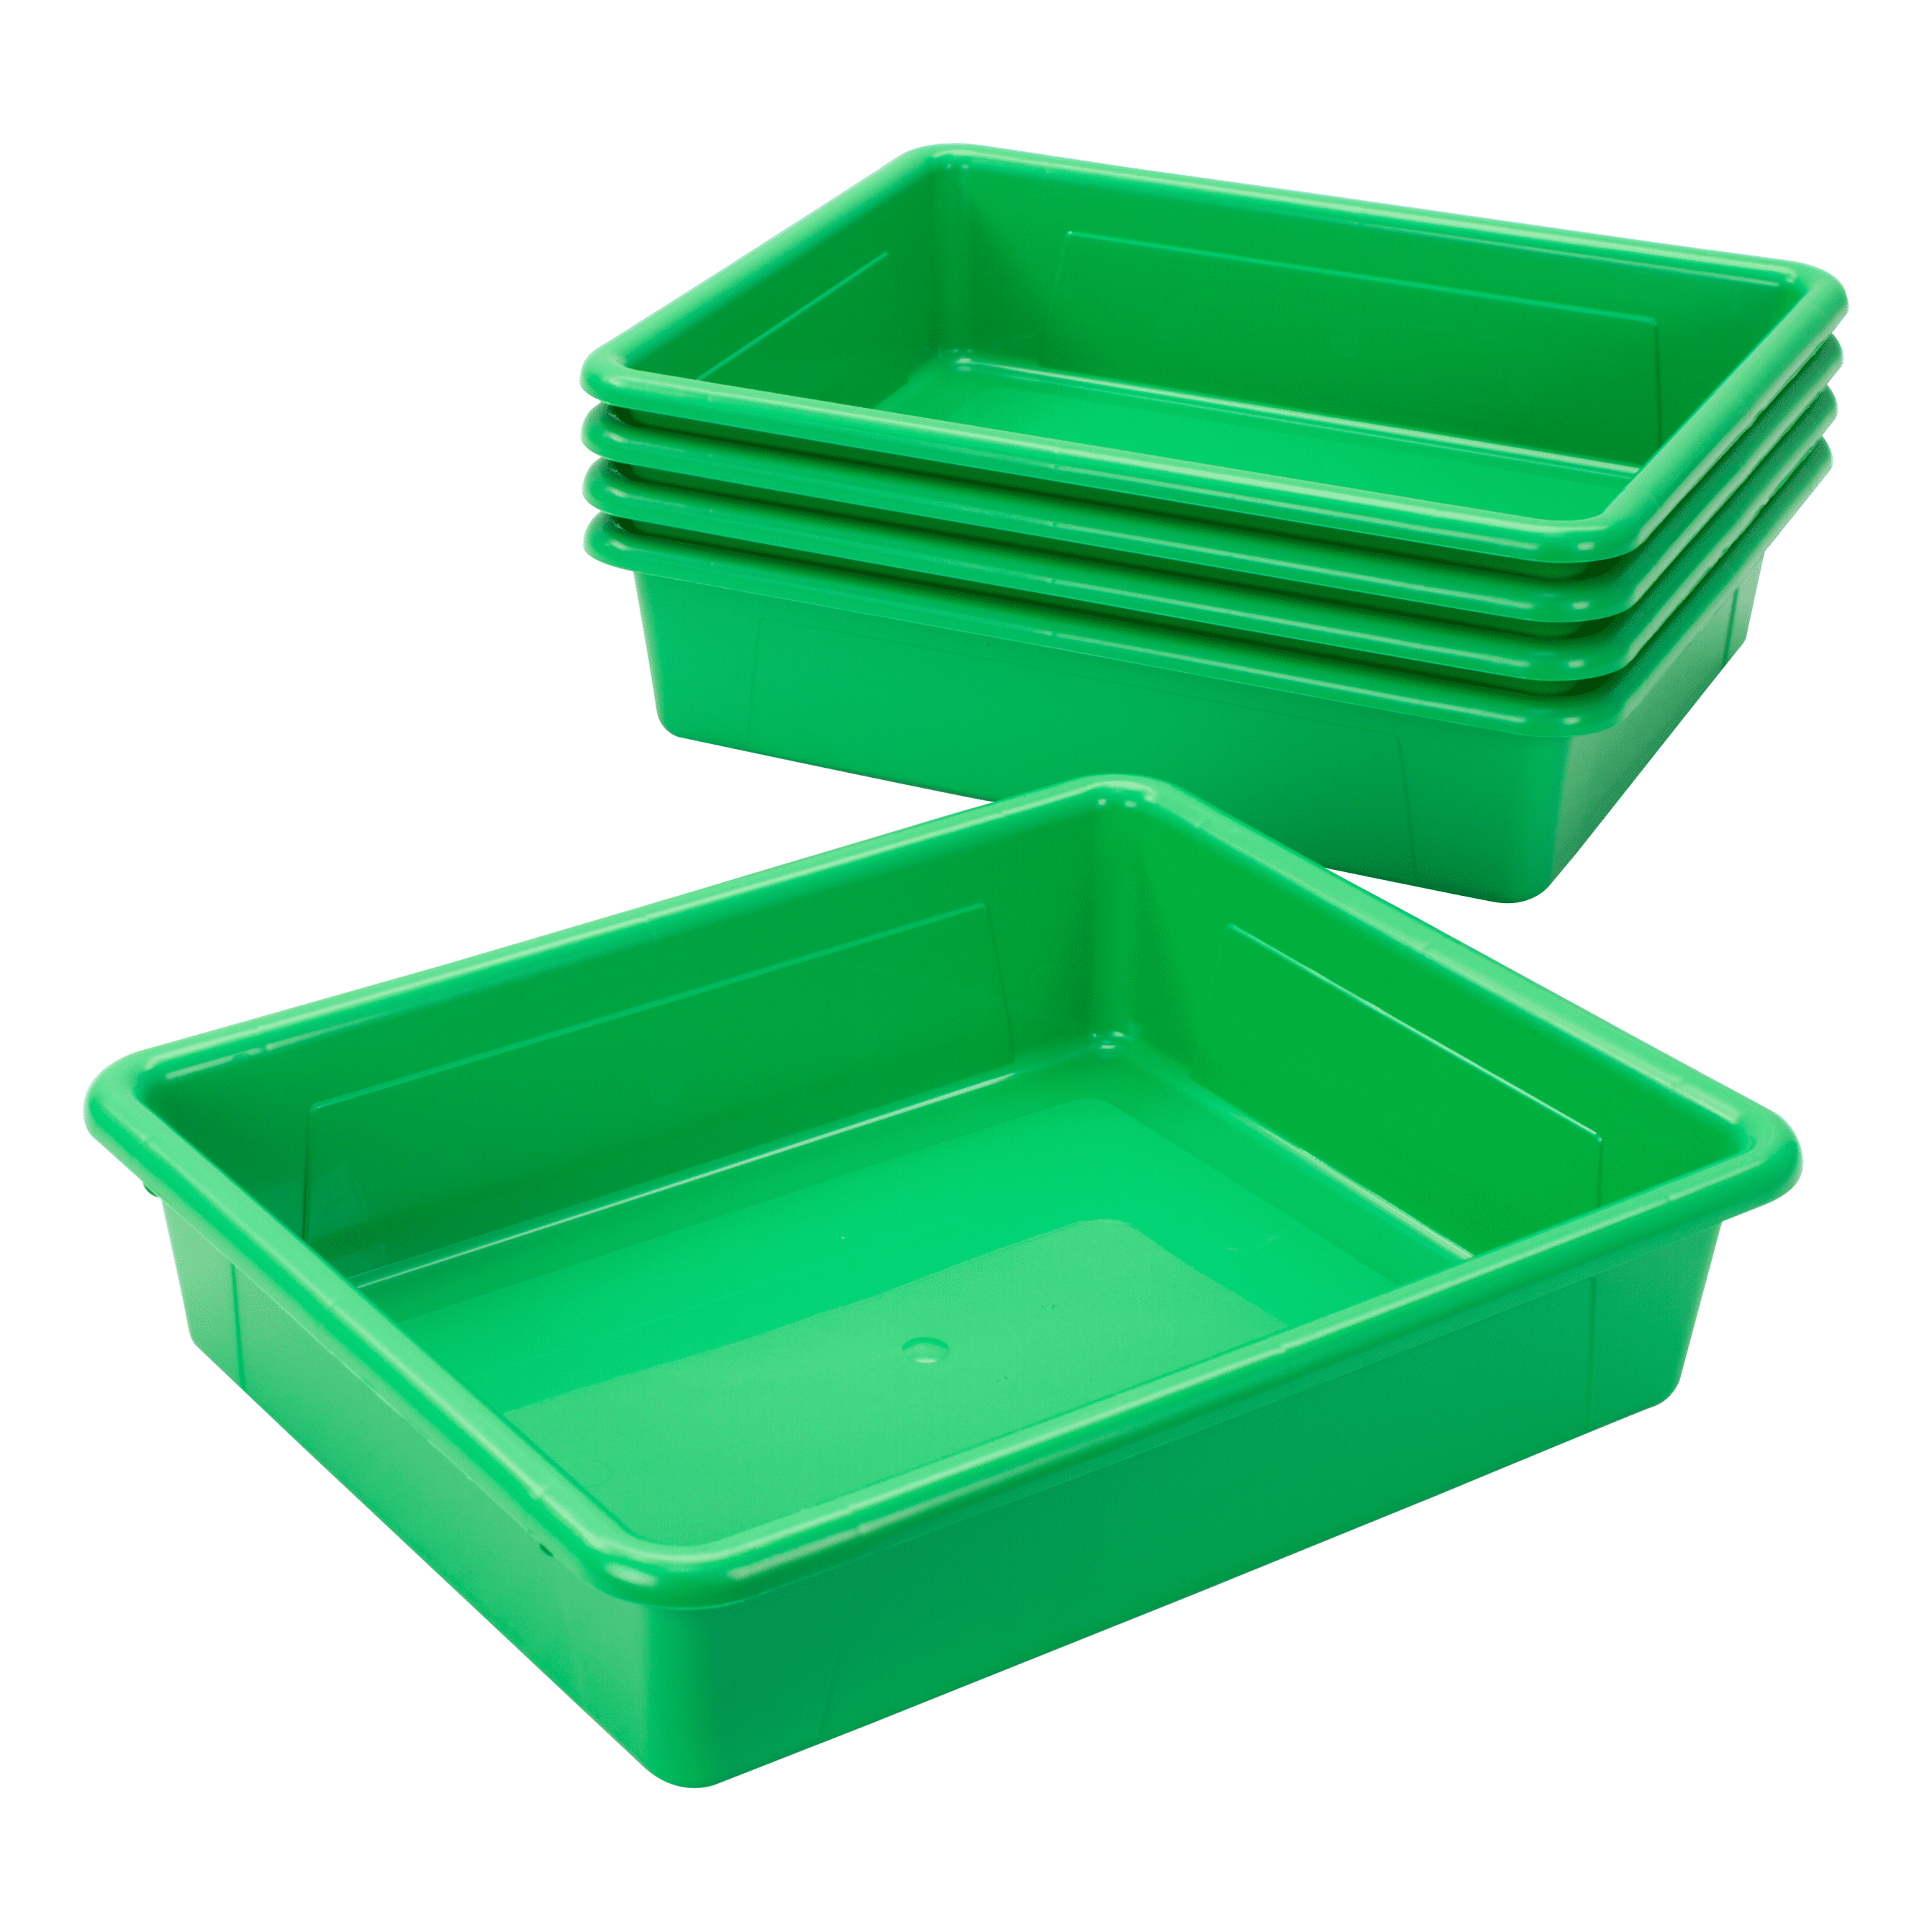 Storex Storage Tray, Letter size, 10 x 13 x 3 Inches, Green, 5-Pack